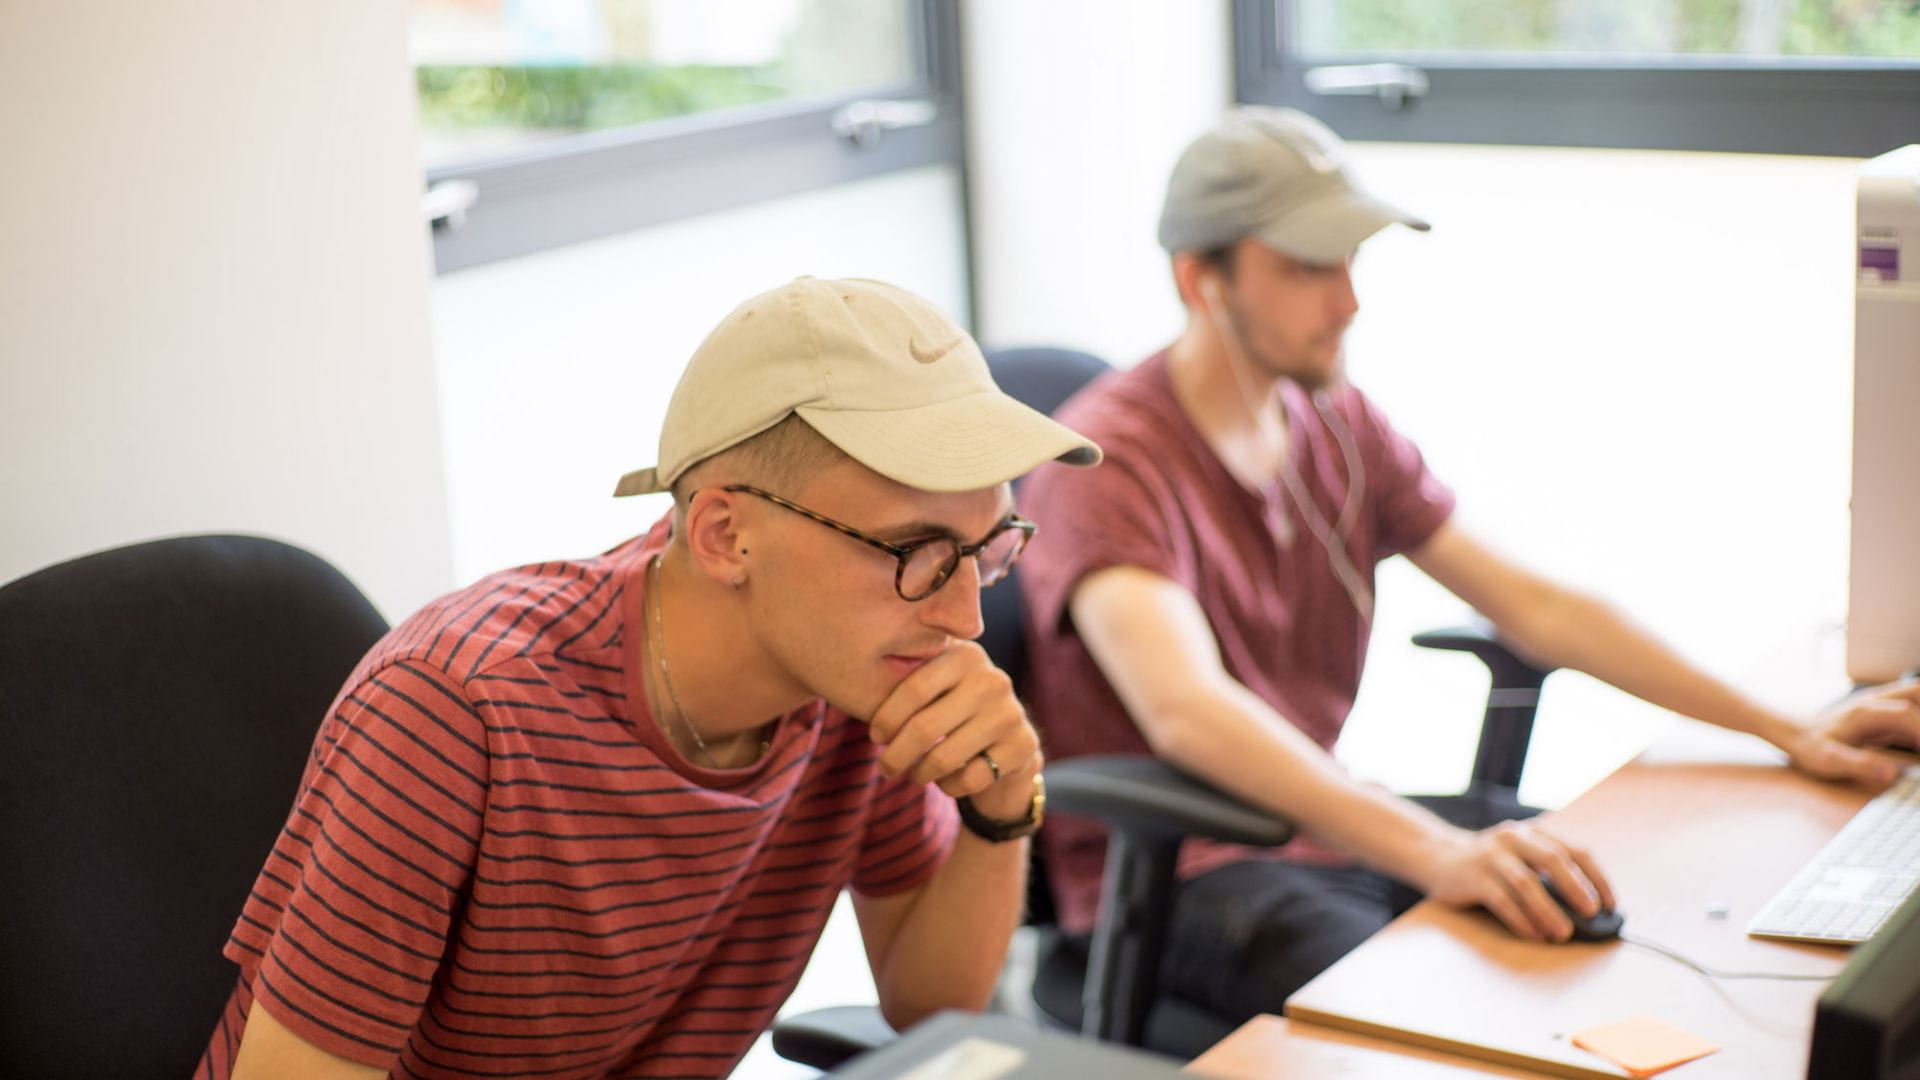 Image of two male students working on computers